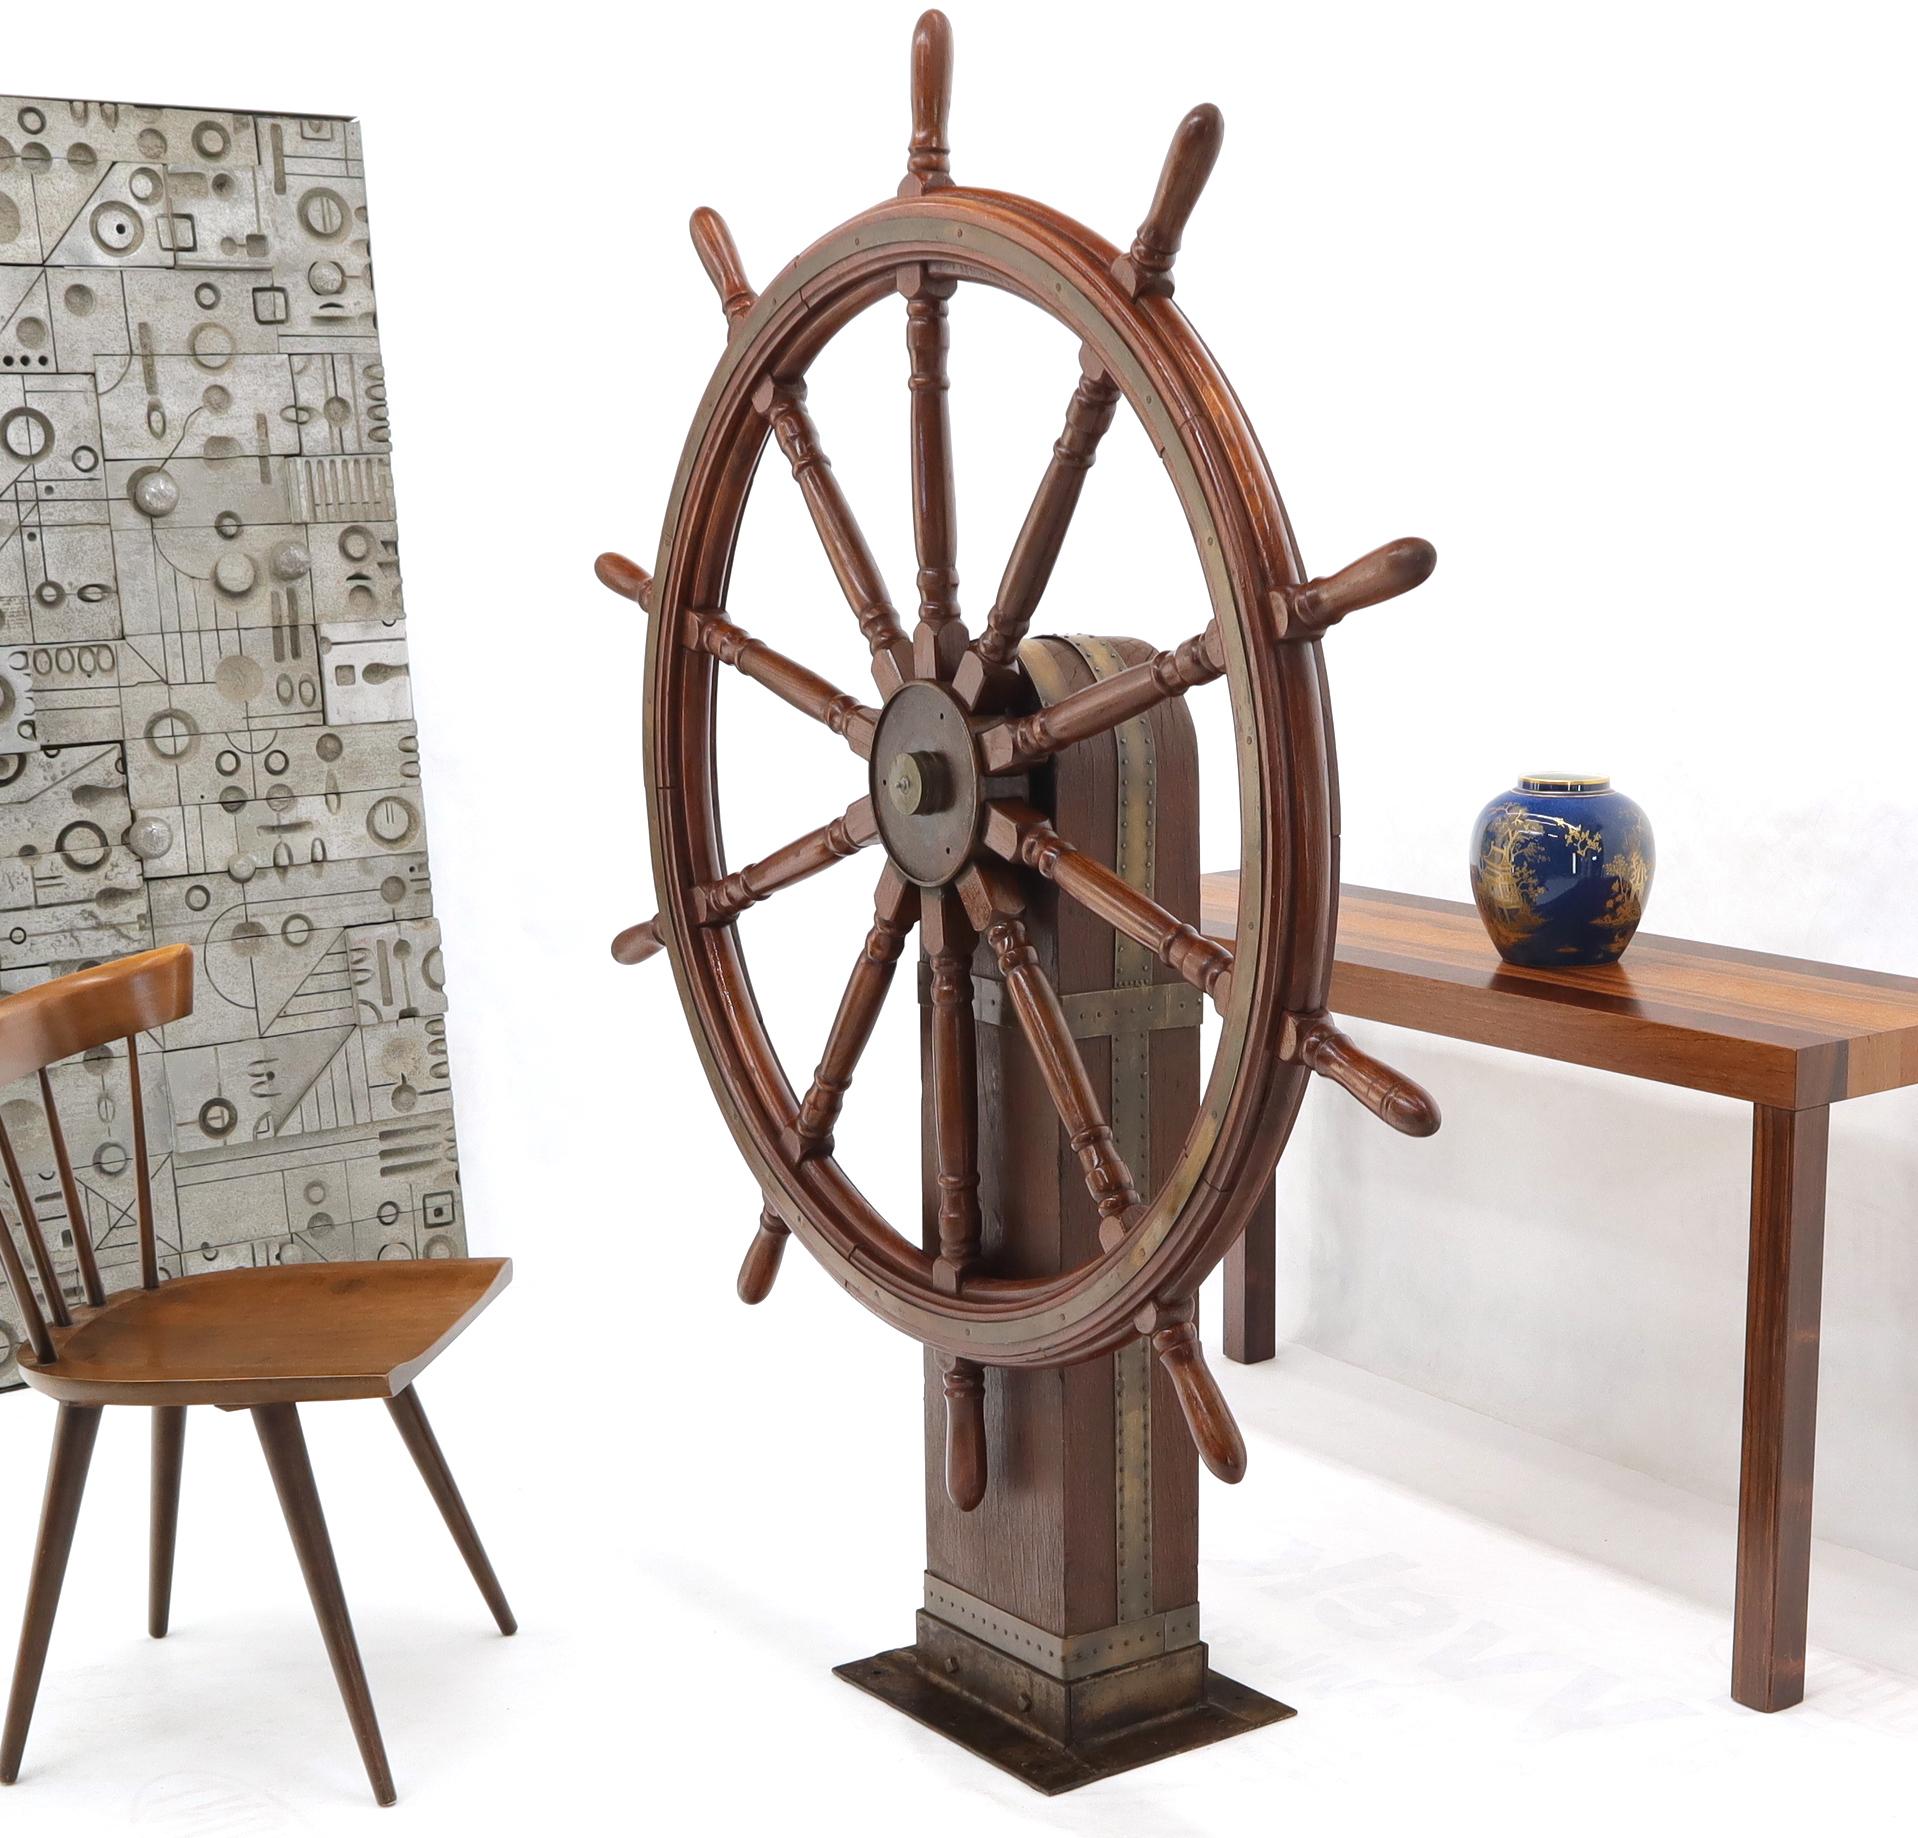 Large decorative display 5 feet in diameter ships wheel Kinetic sculpture. Nicely weathered wood post.